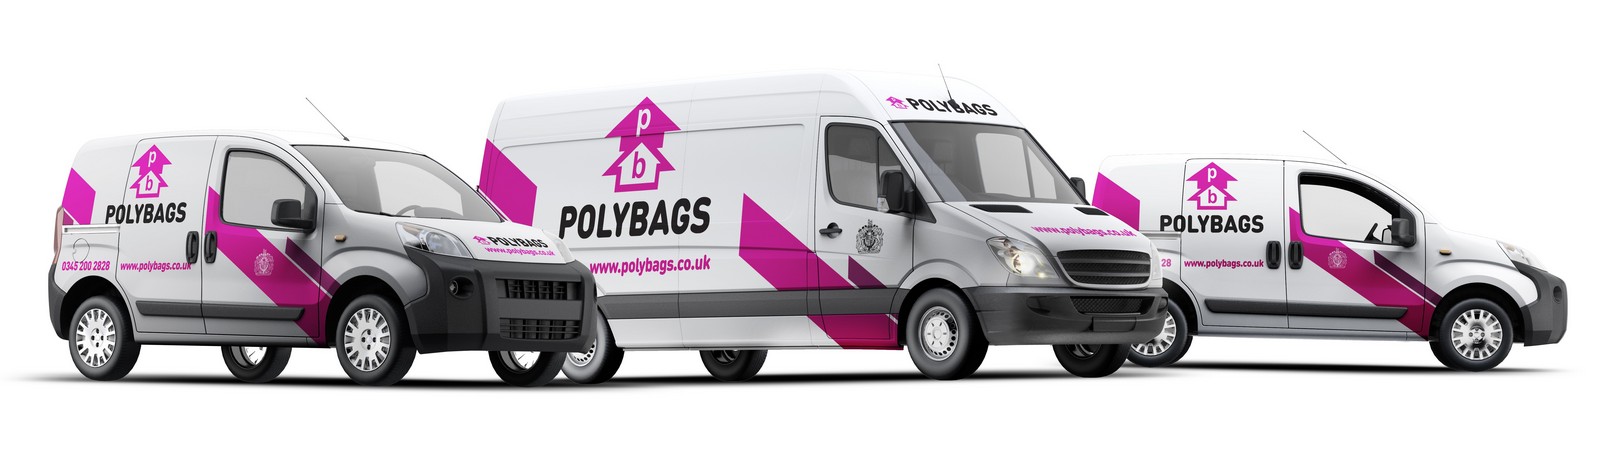 Polybags' delivery vans